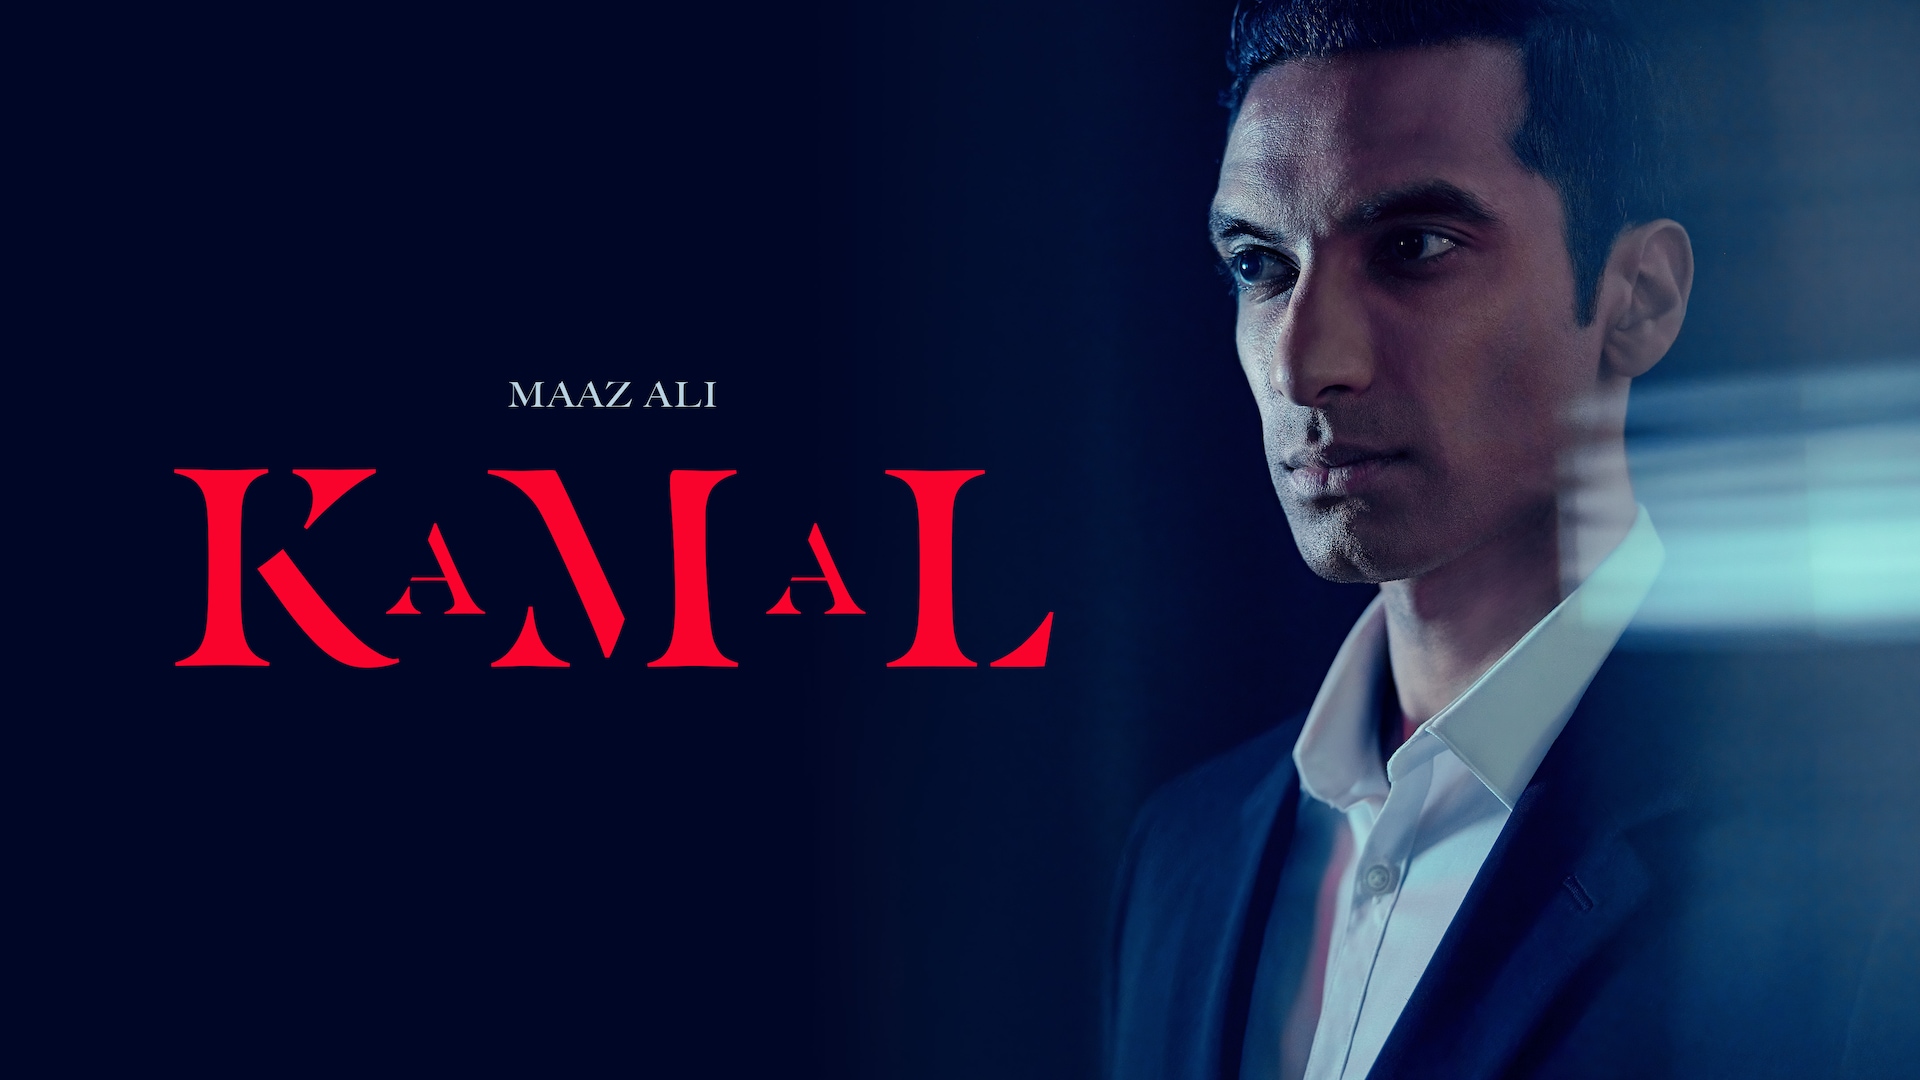 Maaz Ali headshot wearing a white shirt and suit jacket standing in a dark setting for AHS: Delicate